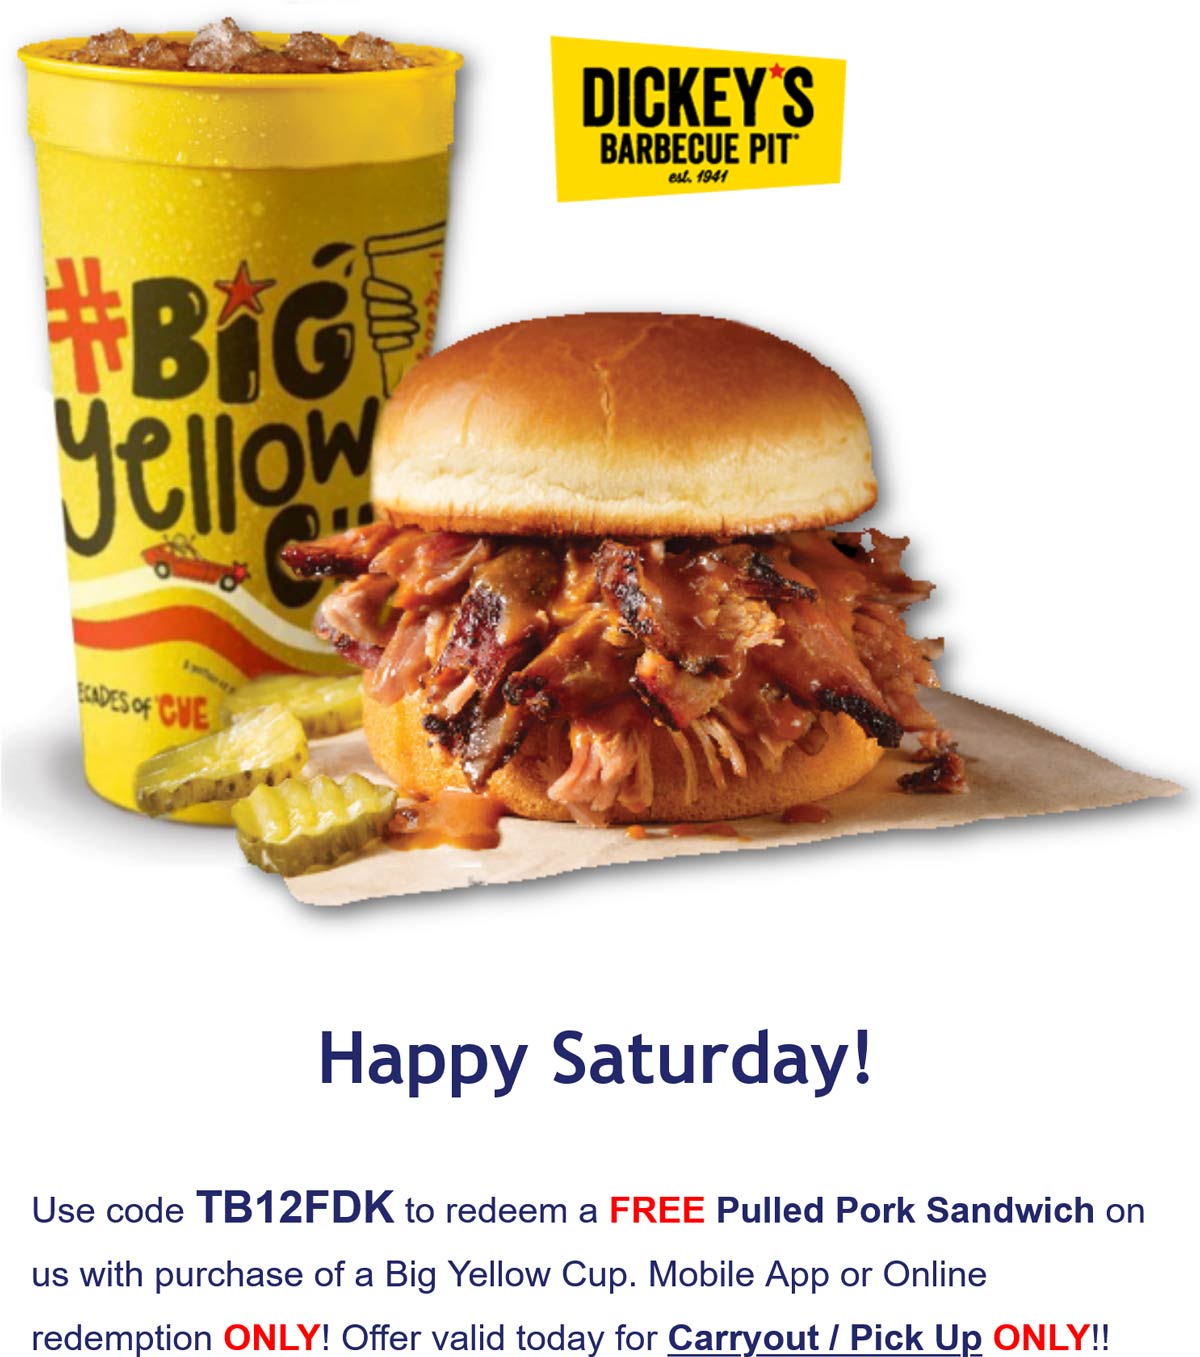 Dickeys Barbecue Pit restaurants Coupon  Free pulled pork sandwich with your drink today at Dickeys Barbecue Pit via promo code TB12FDK #dickeysbarbecuepit 